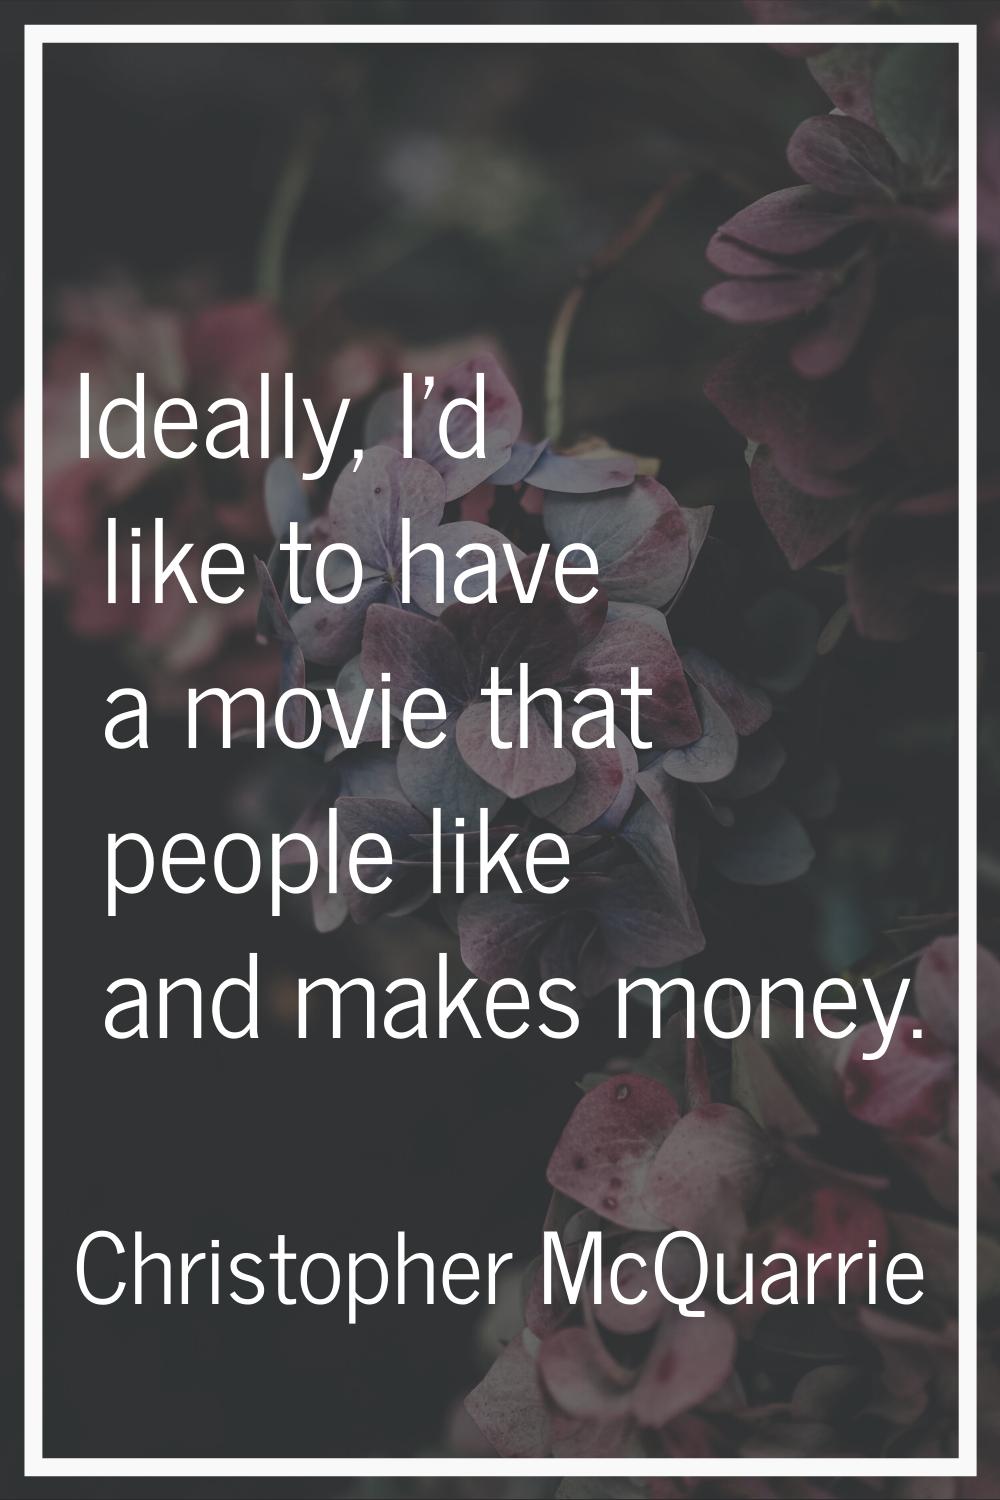 Ideally, I'd like to have a movie that people like and makes money.